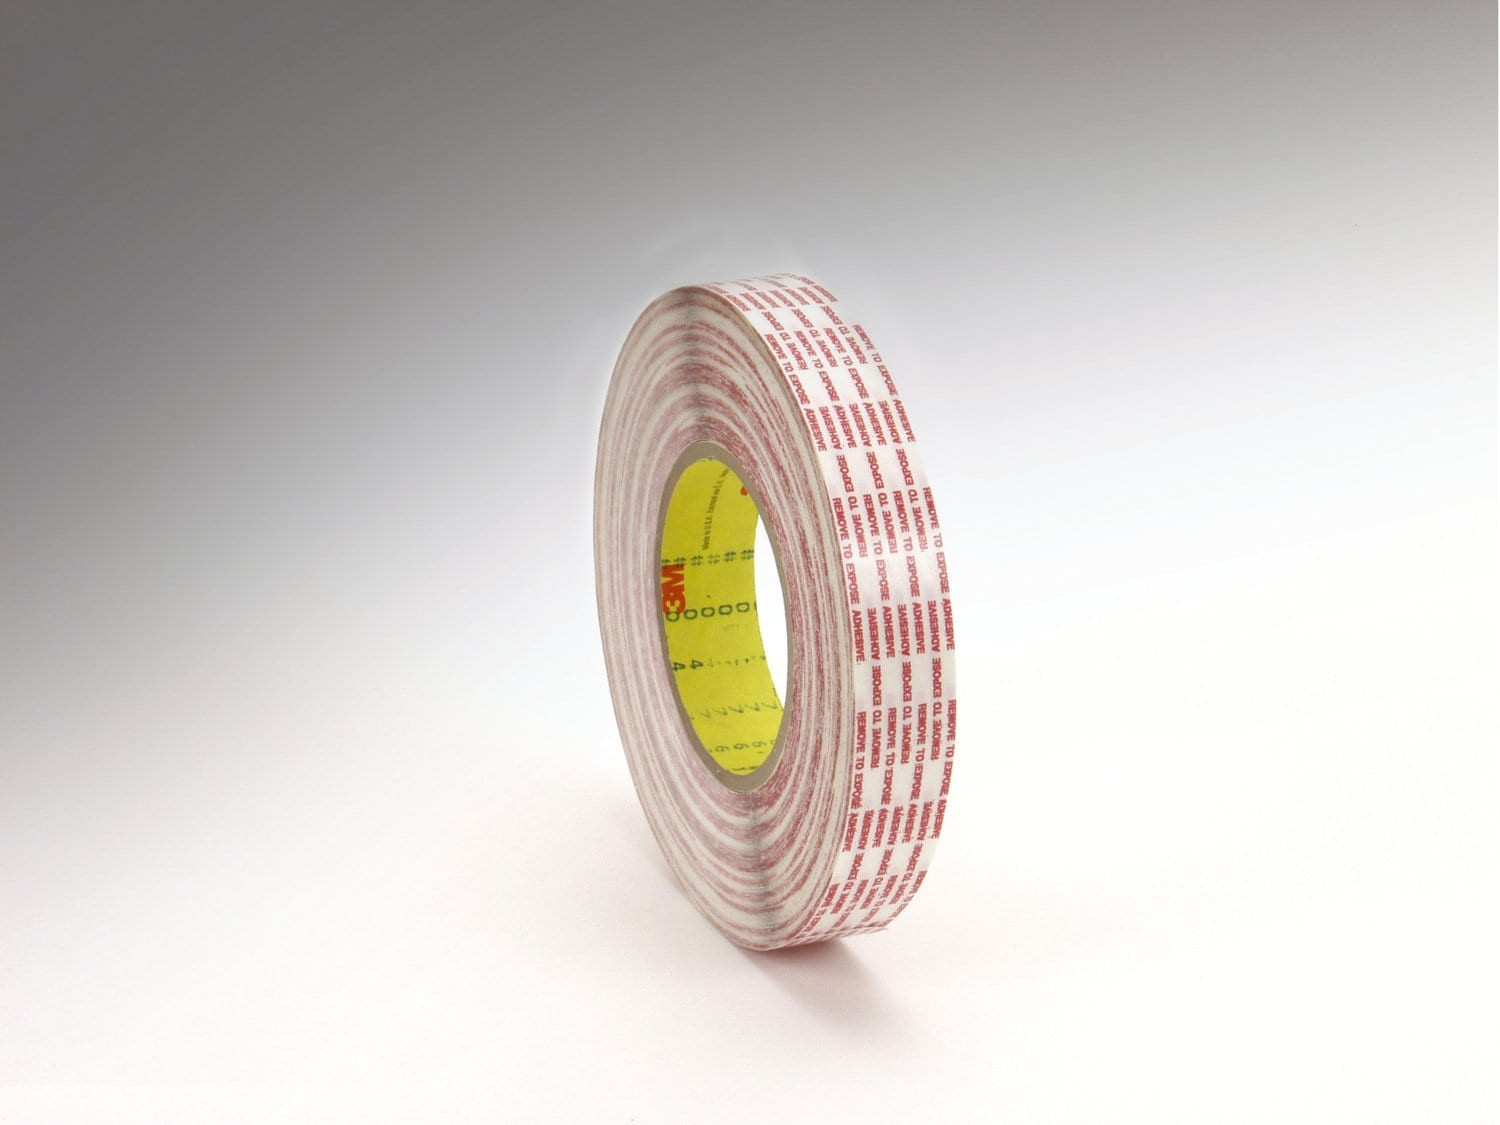 7000123589 - 3M Double Coated Tape Extended Liner 476XL, Translucent, 1 1/2 in x 540
yd, 6 mil, 4 rolls per case